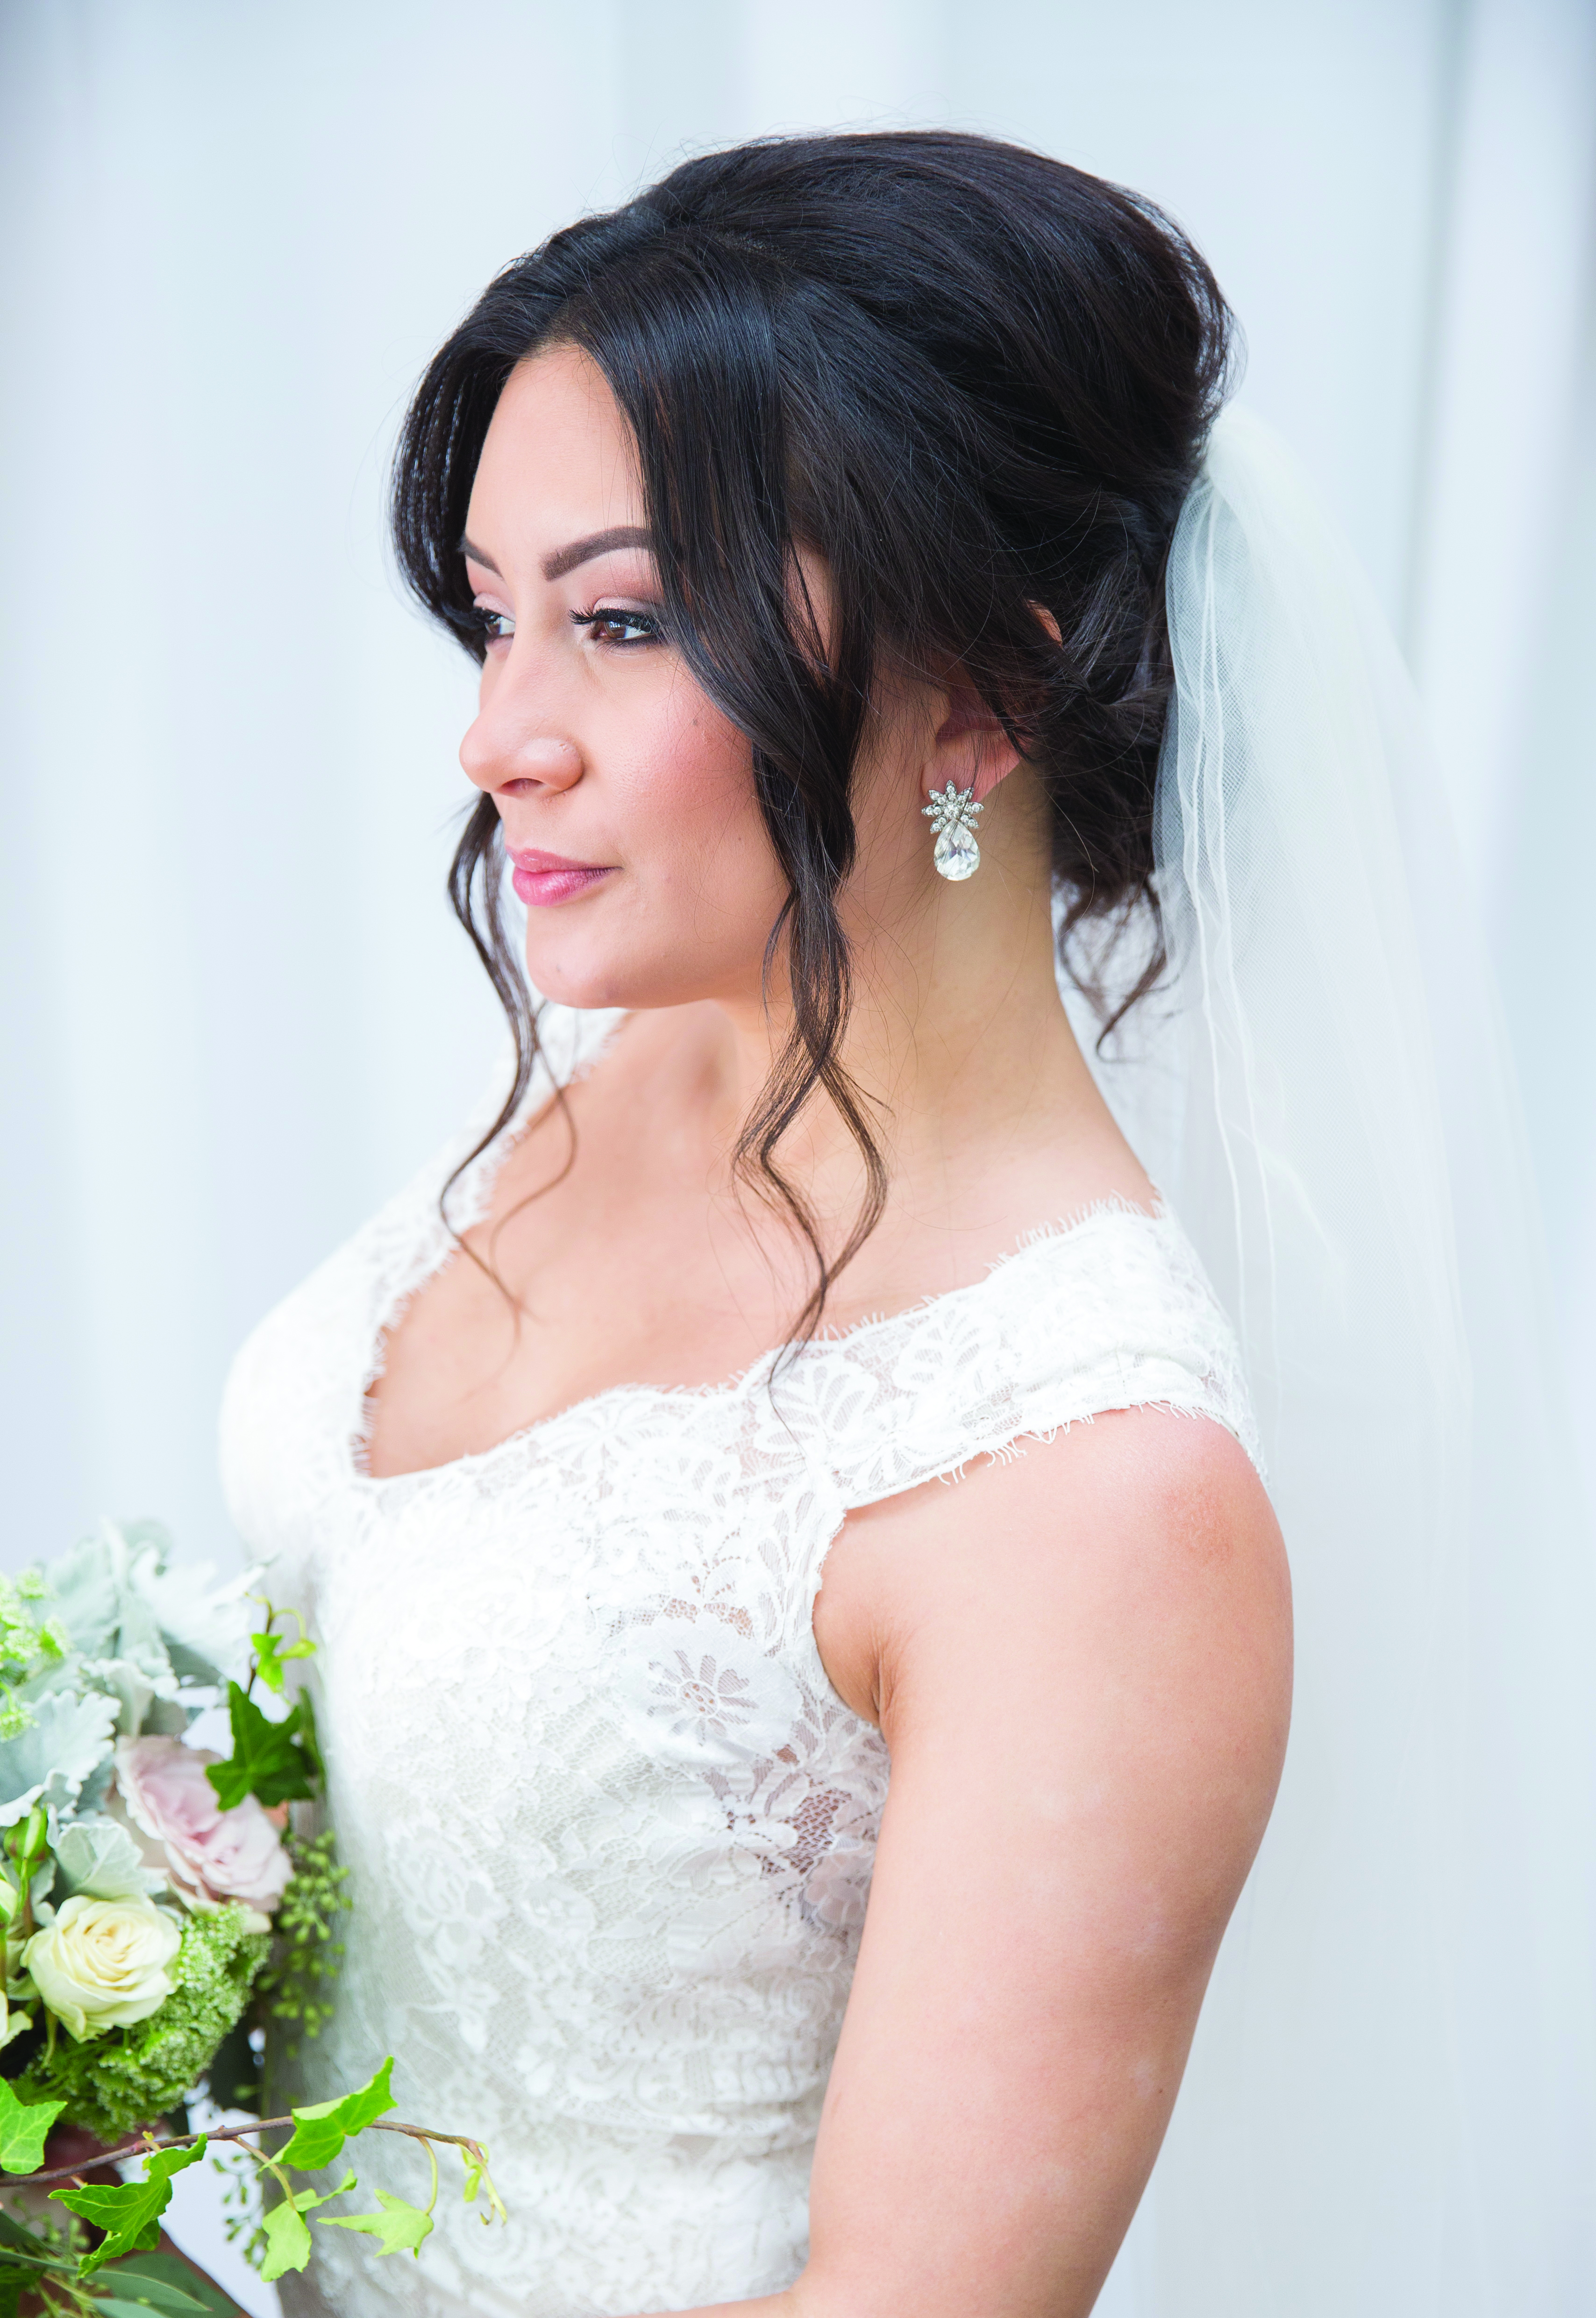 Wedding makeup: why you should hire a professional